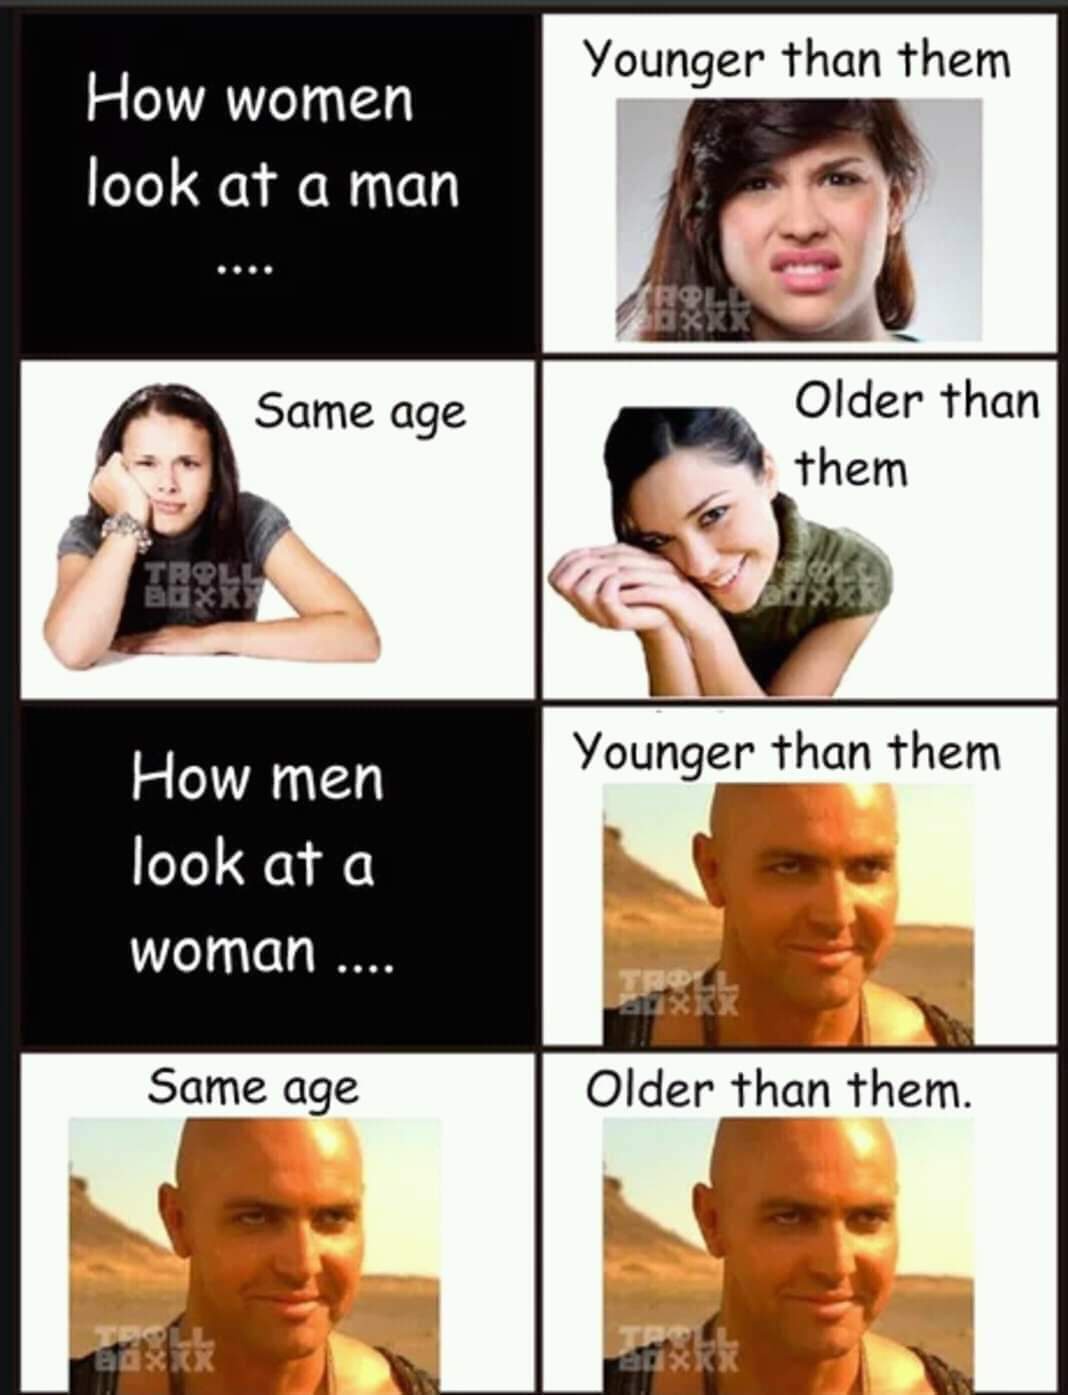 How women look at a man and how men look at a woman :)